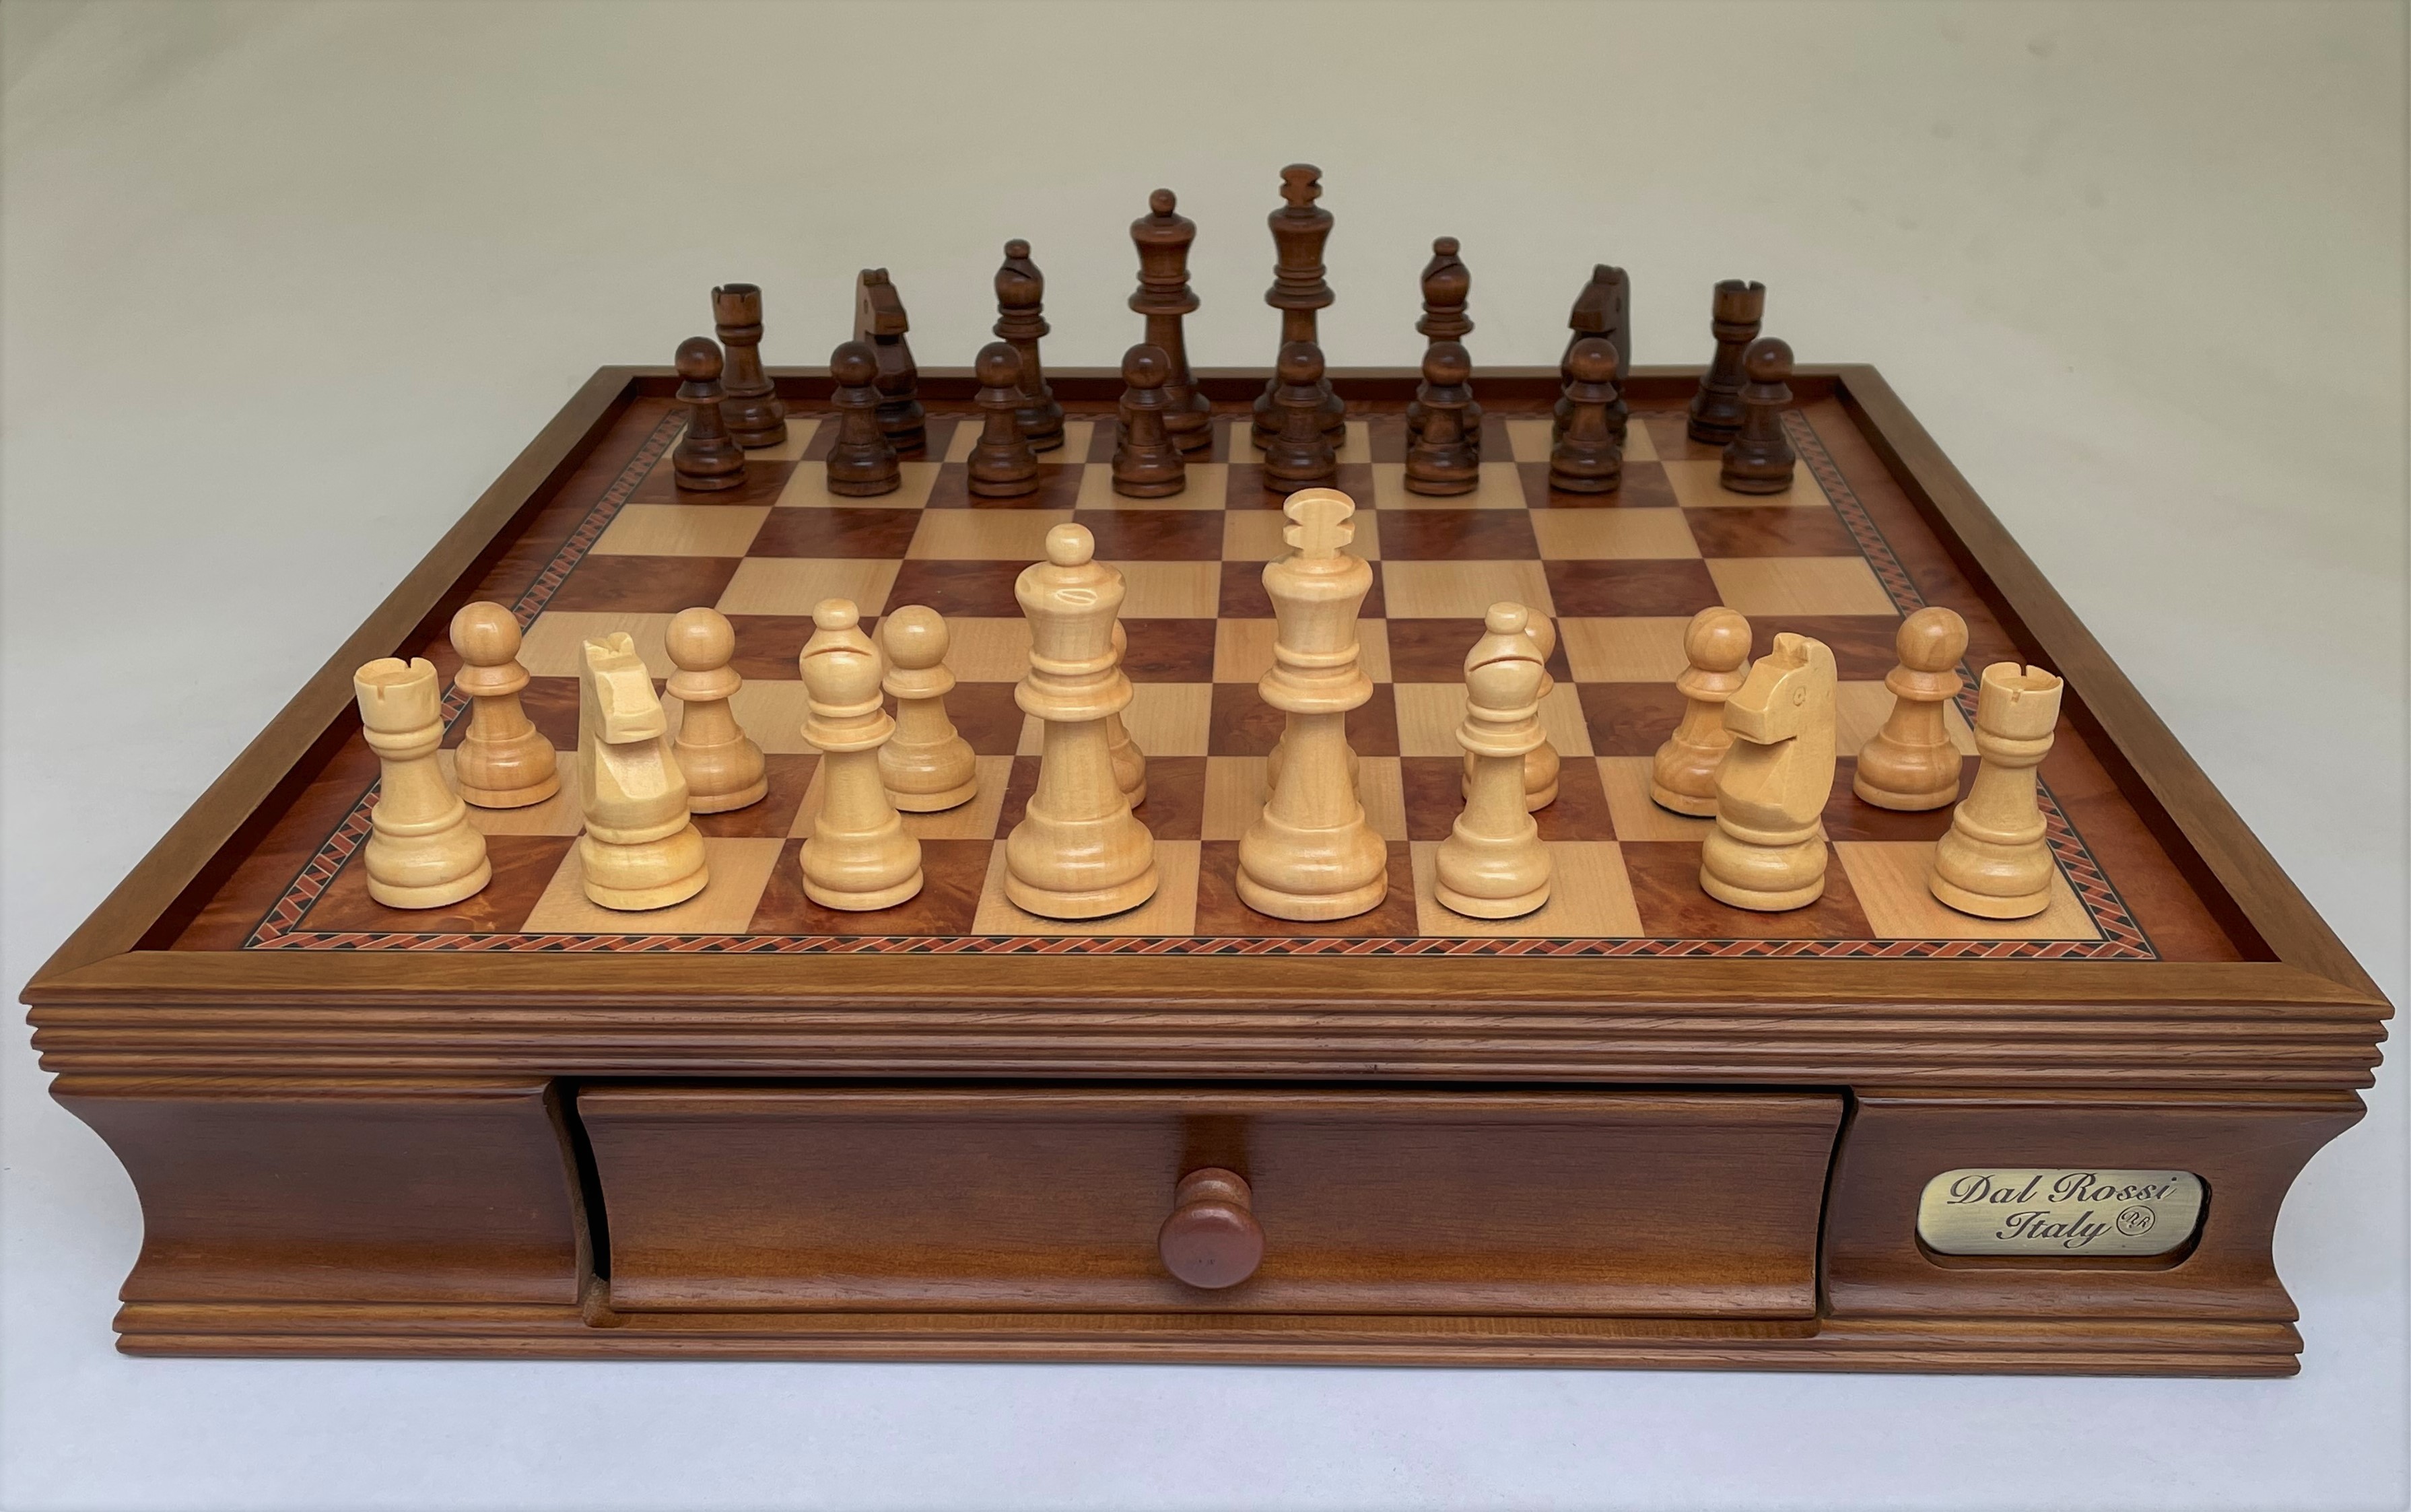 Dal Rossi Chess Set 16", With Wooden Chess Pieces 